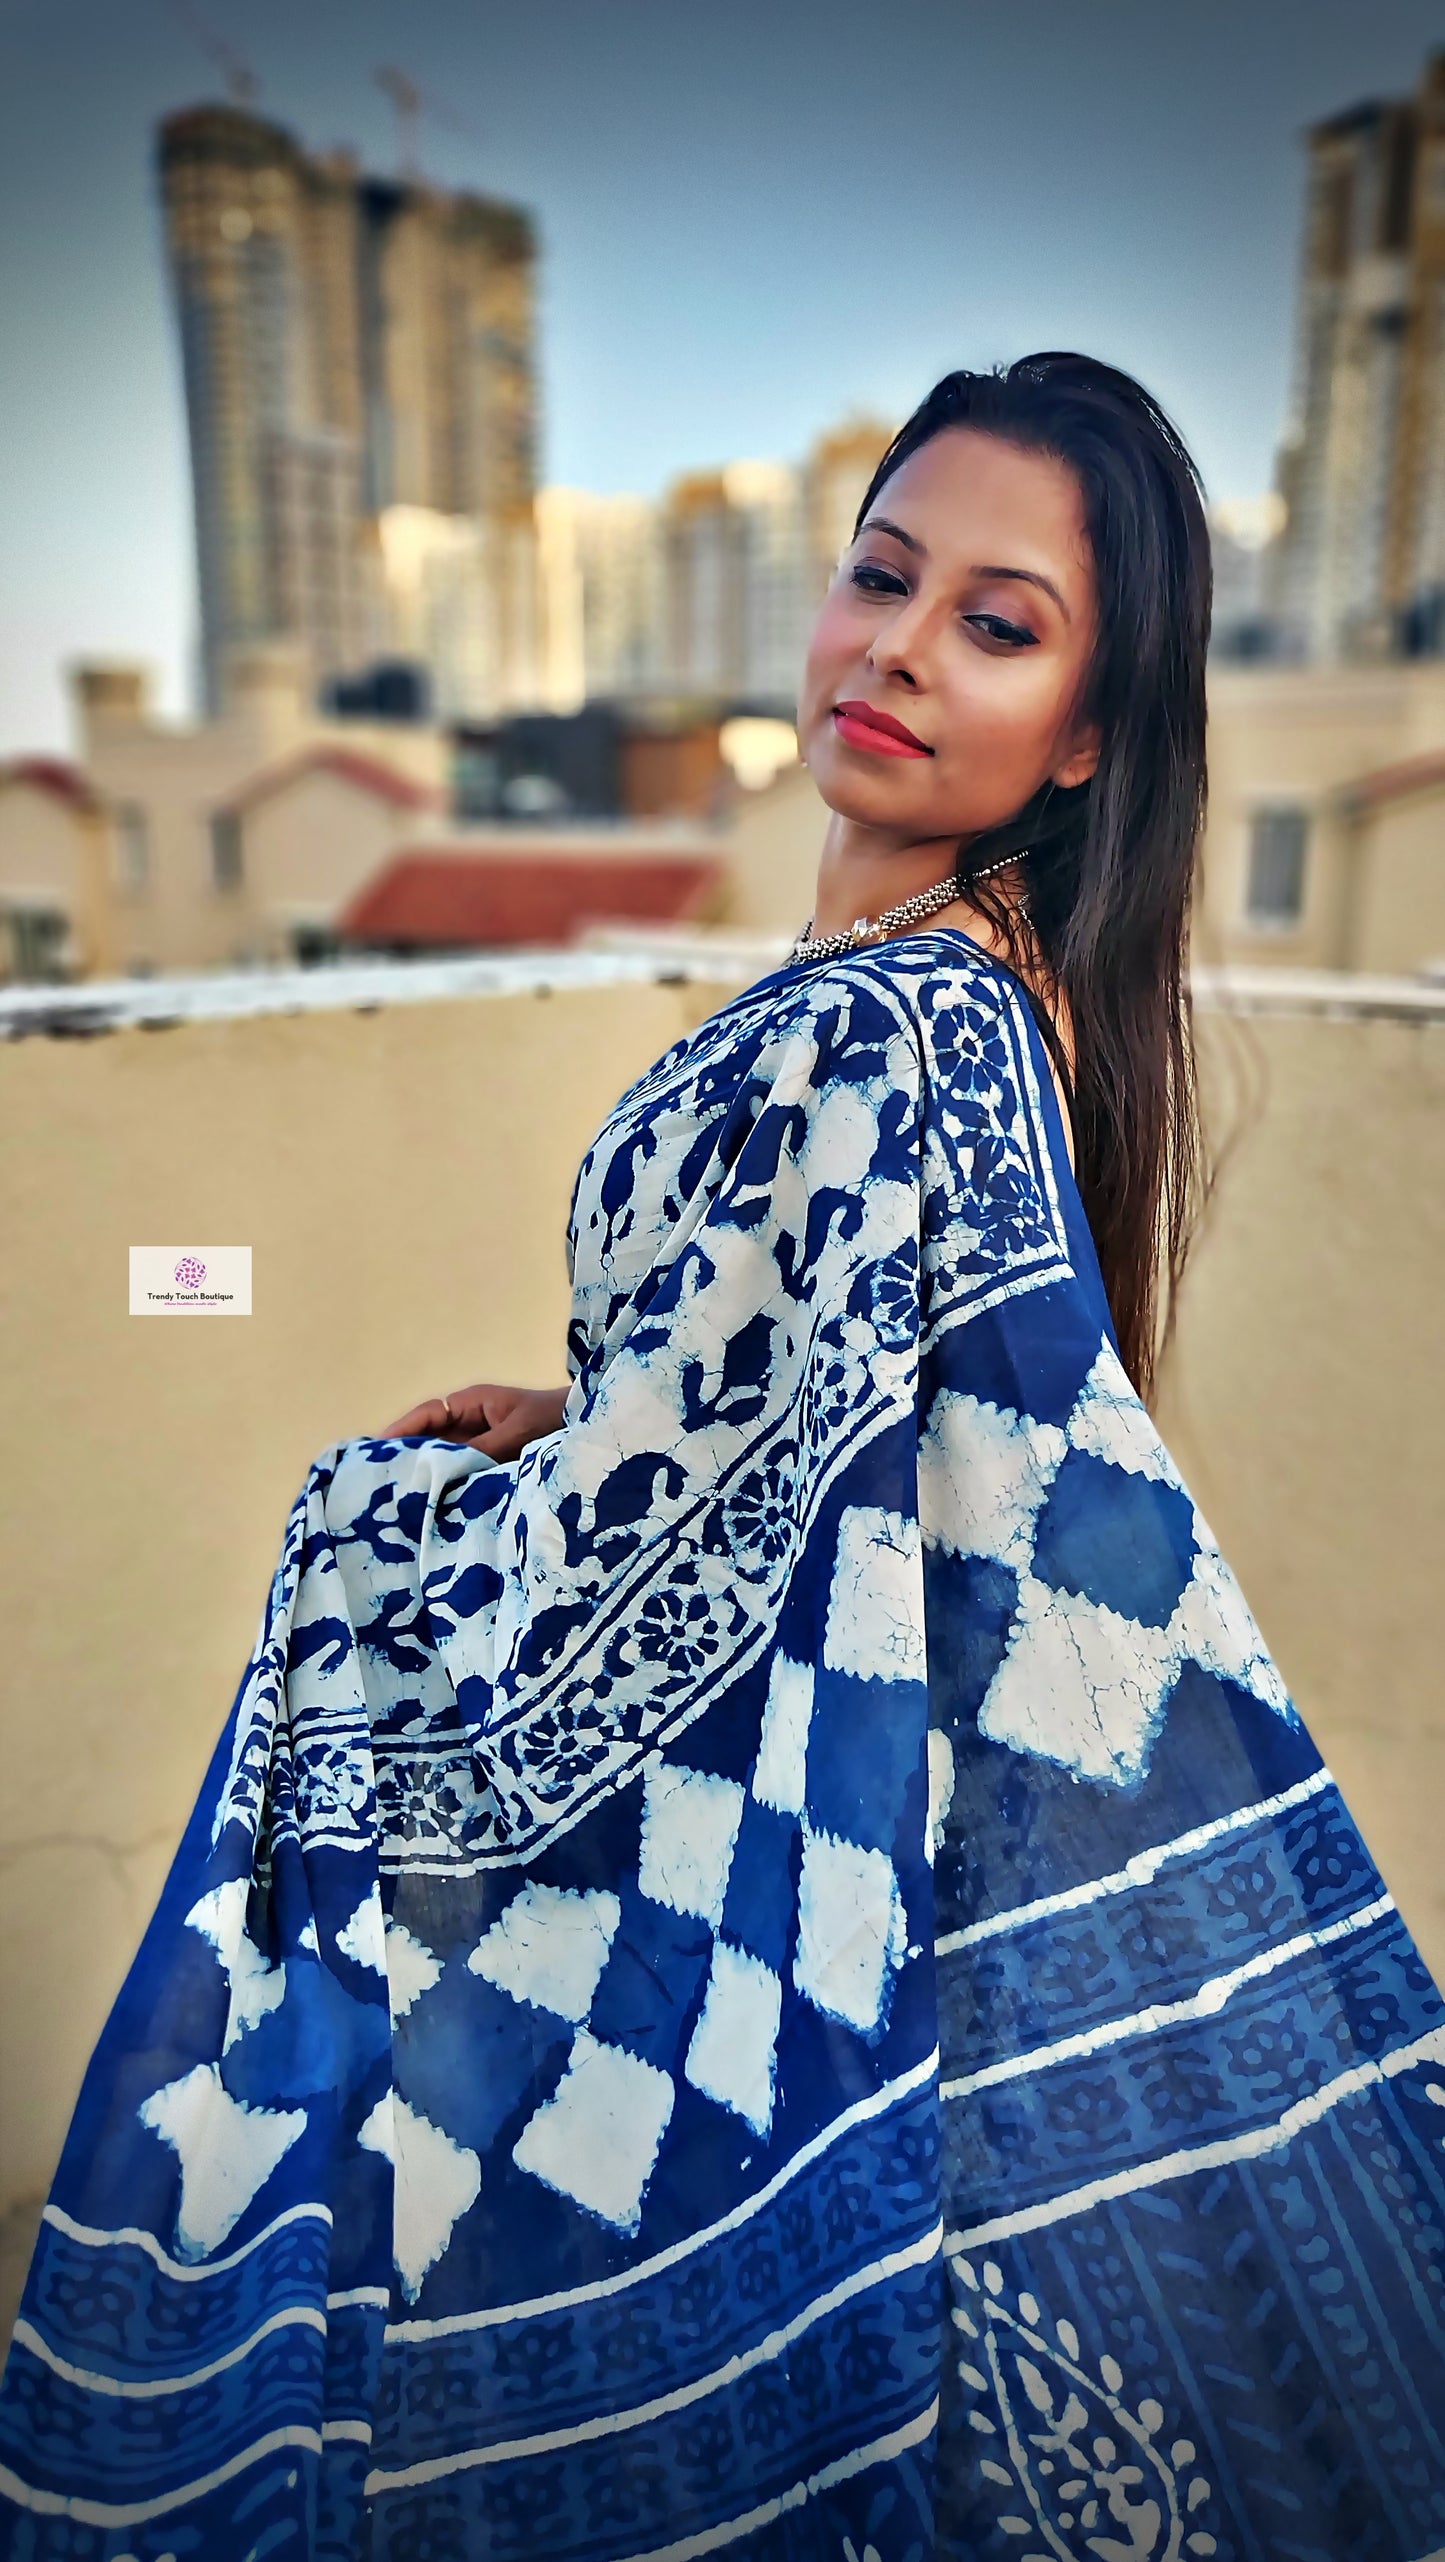 Indigo pattern Organic Handblock print in natural dye mul cotton saree office and casual styling best price best summer fabric with blouse piece